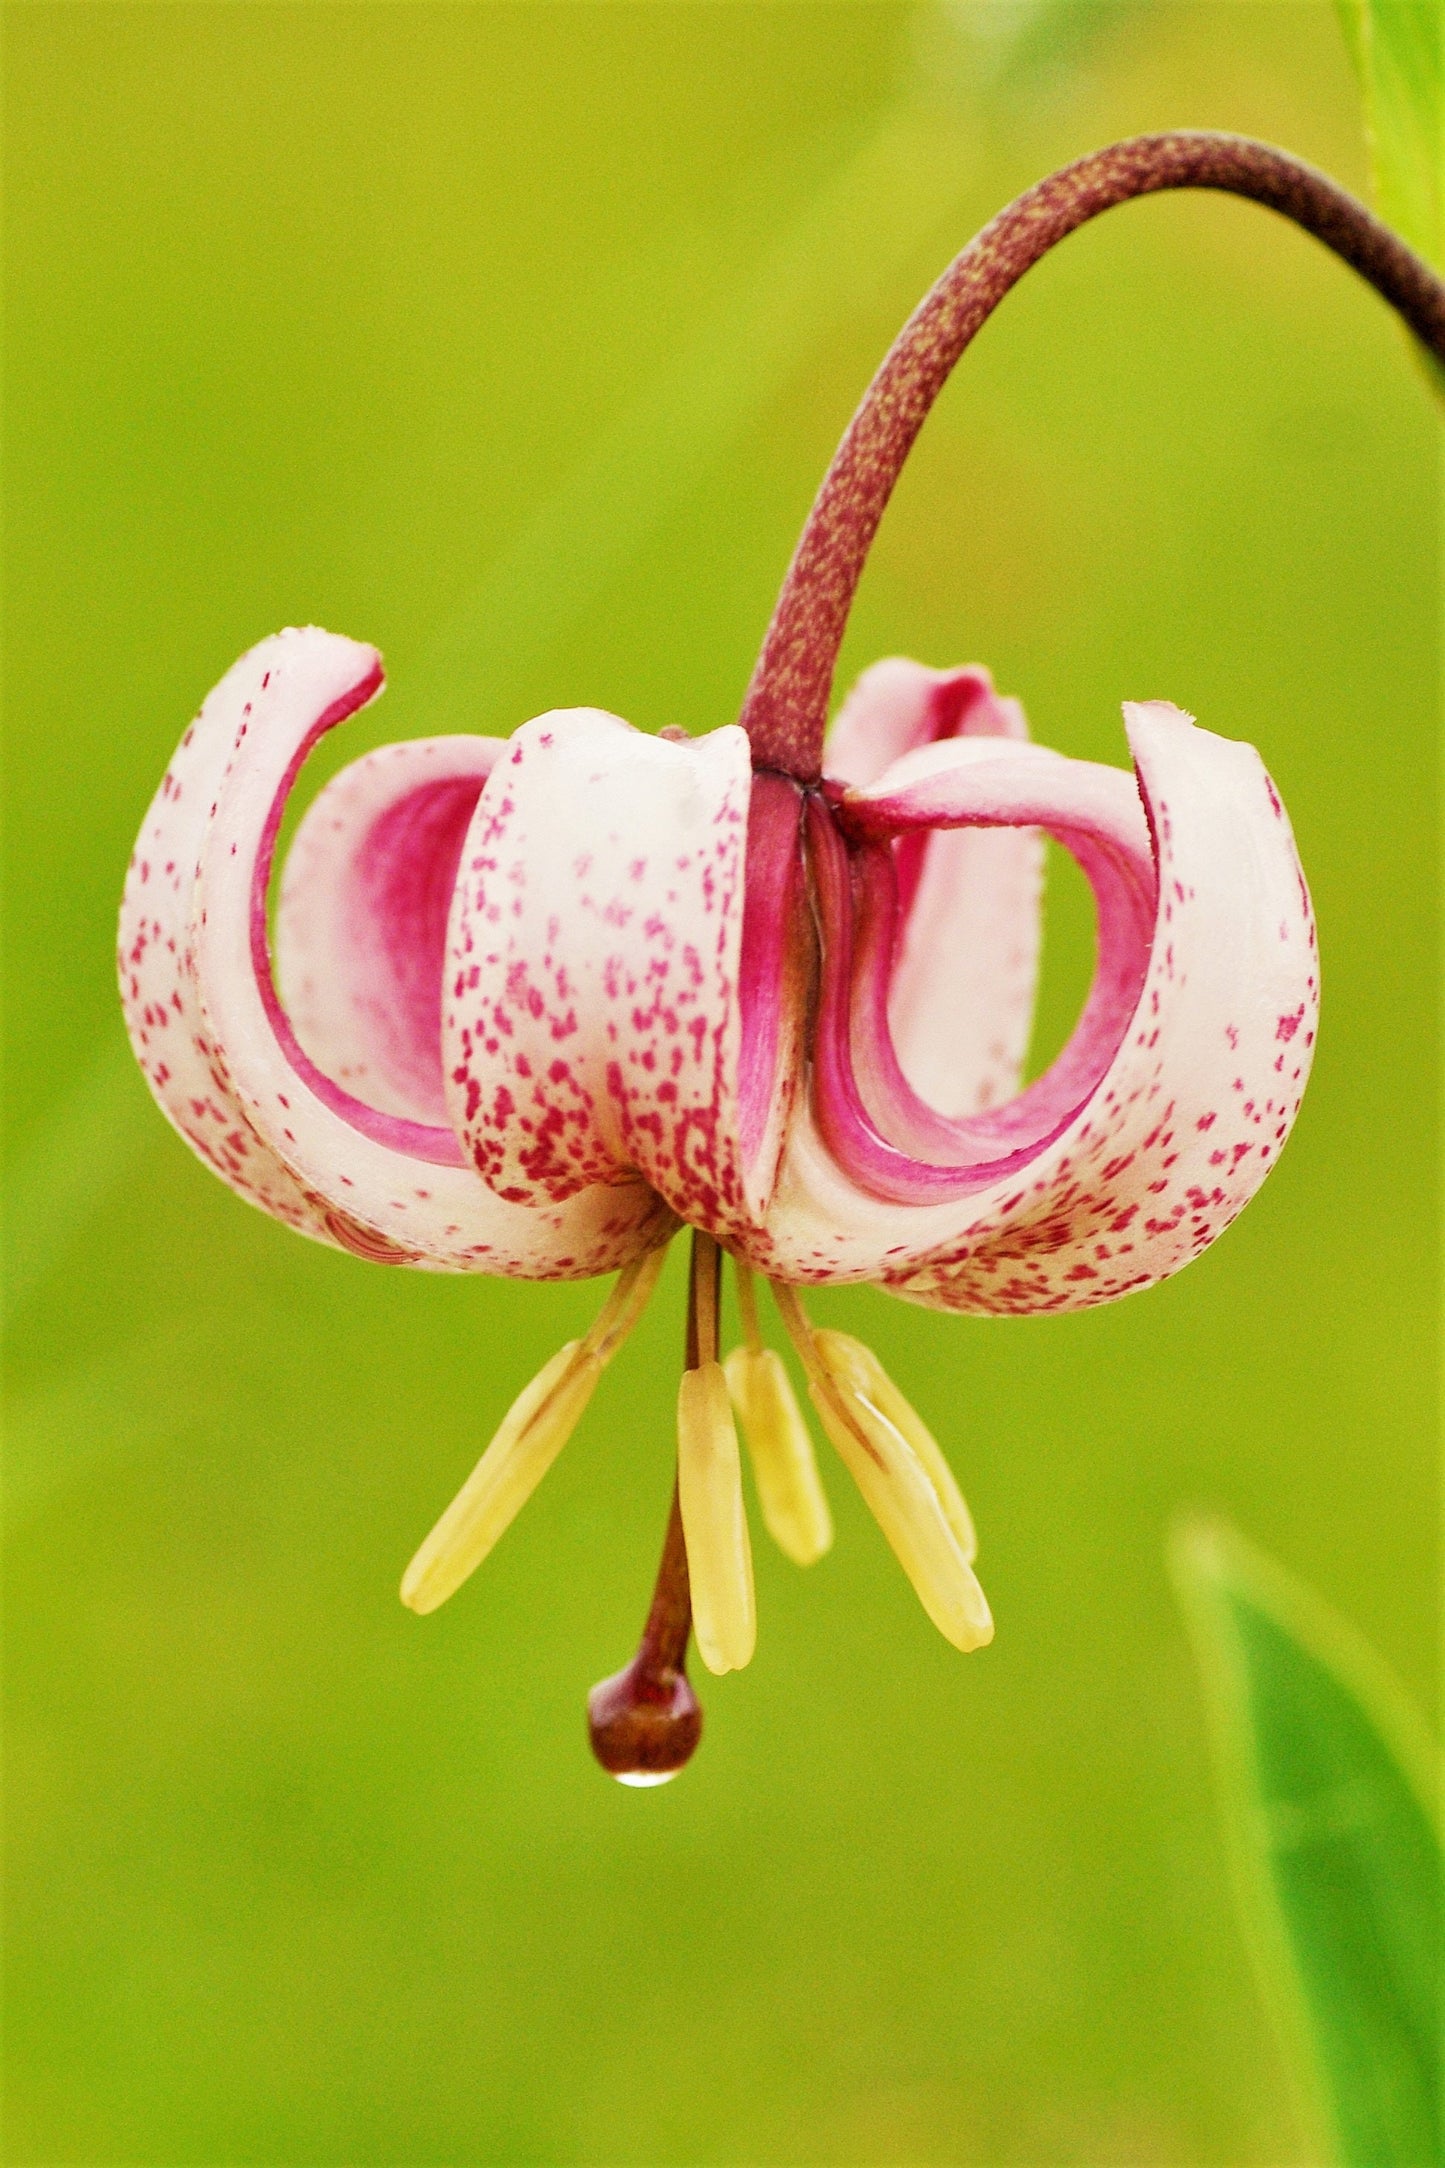 10 Lilium MARTAGON LILY Mixed Color Turk's Cap Lily Red Pink Orange White Yellow Flower Seeds